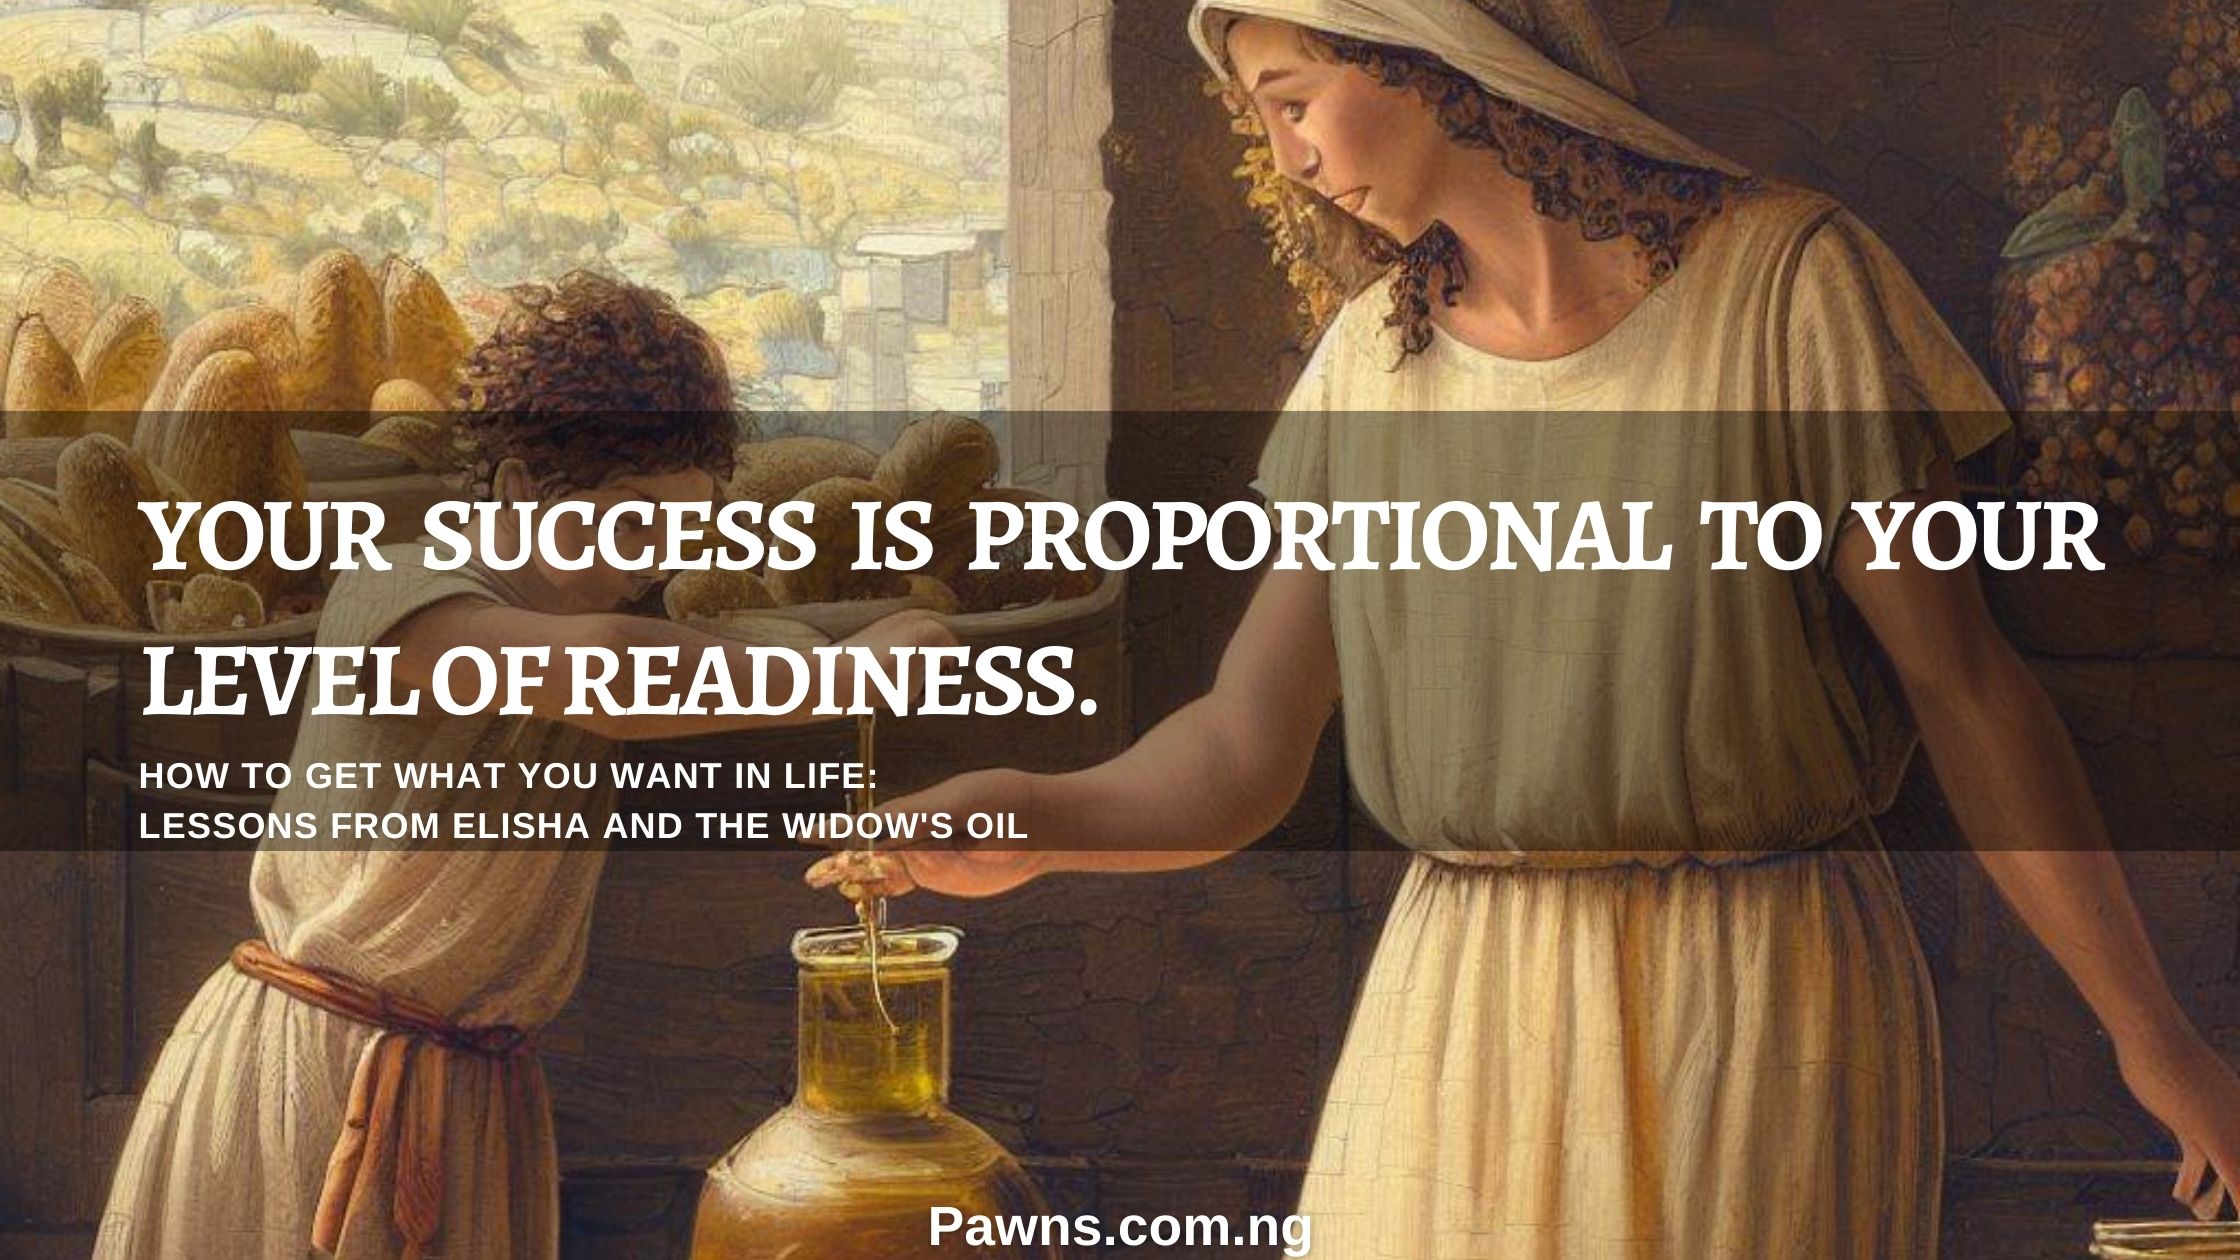 How To Get What You Want In Life 7 Lessons From Elisha And The Widow's Oil your success is proportional to your level of readiness